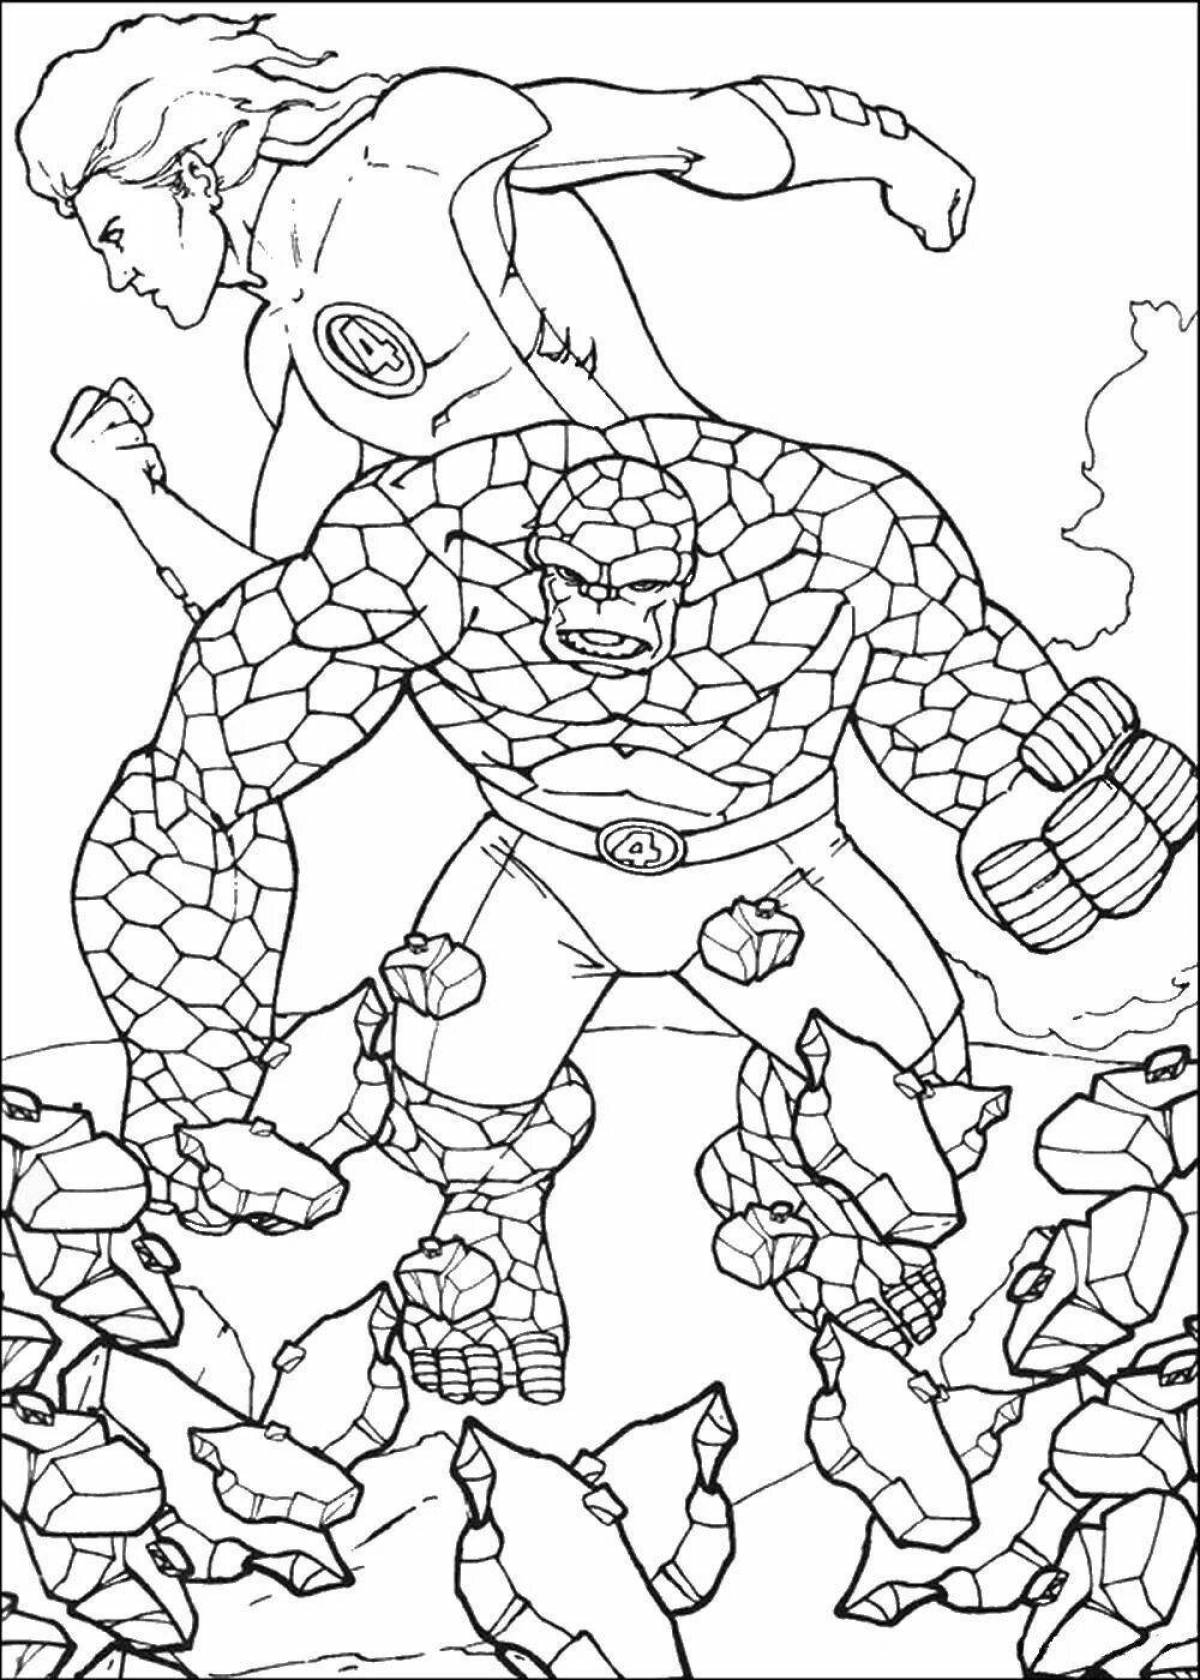 Adorable superhero coloring book for kids 6-7 years old